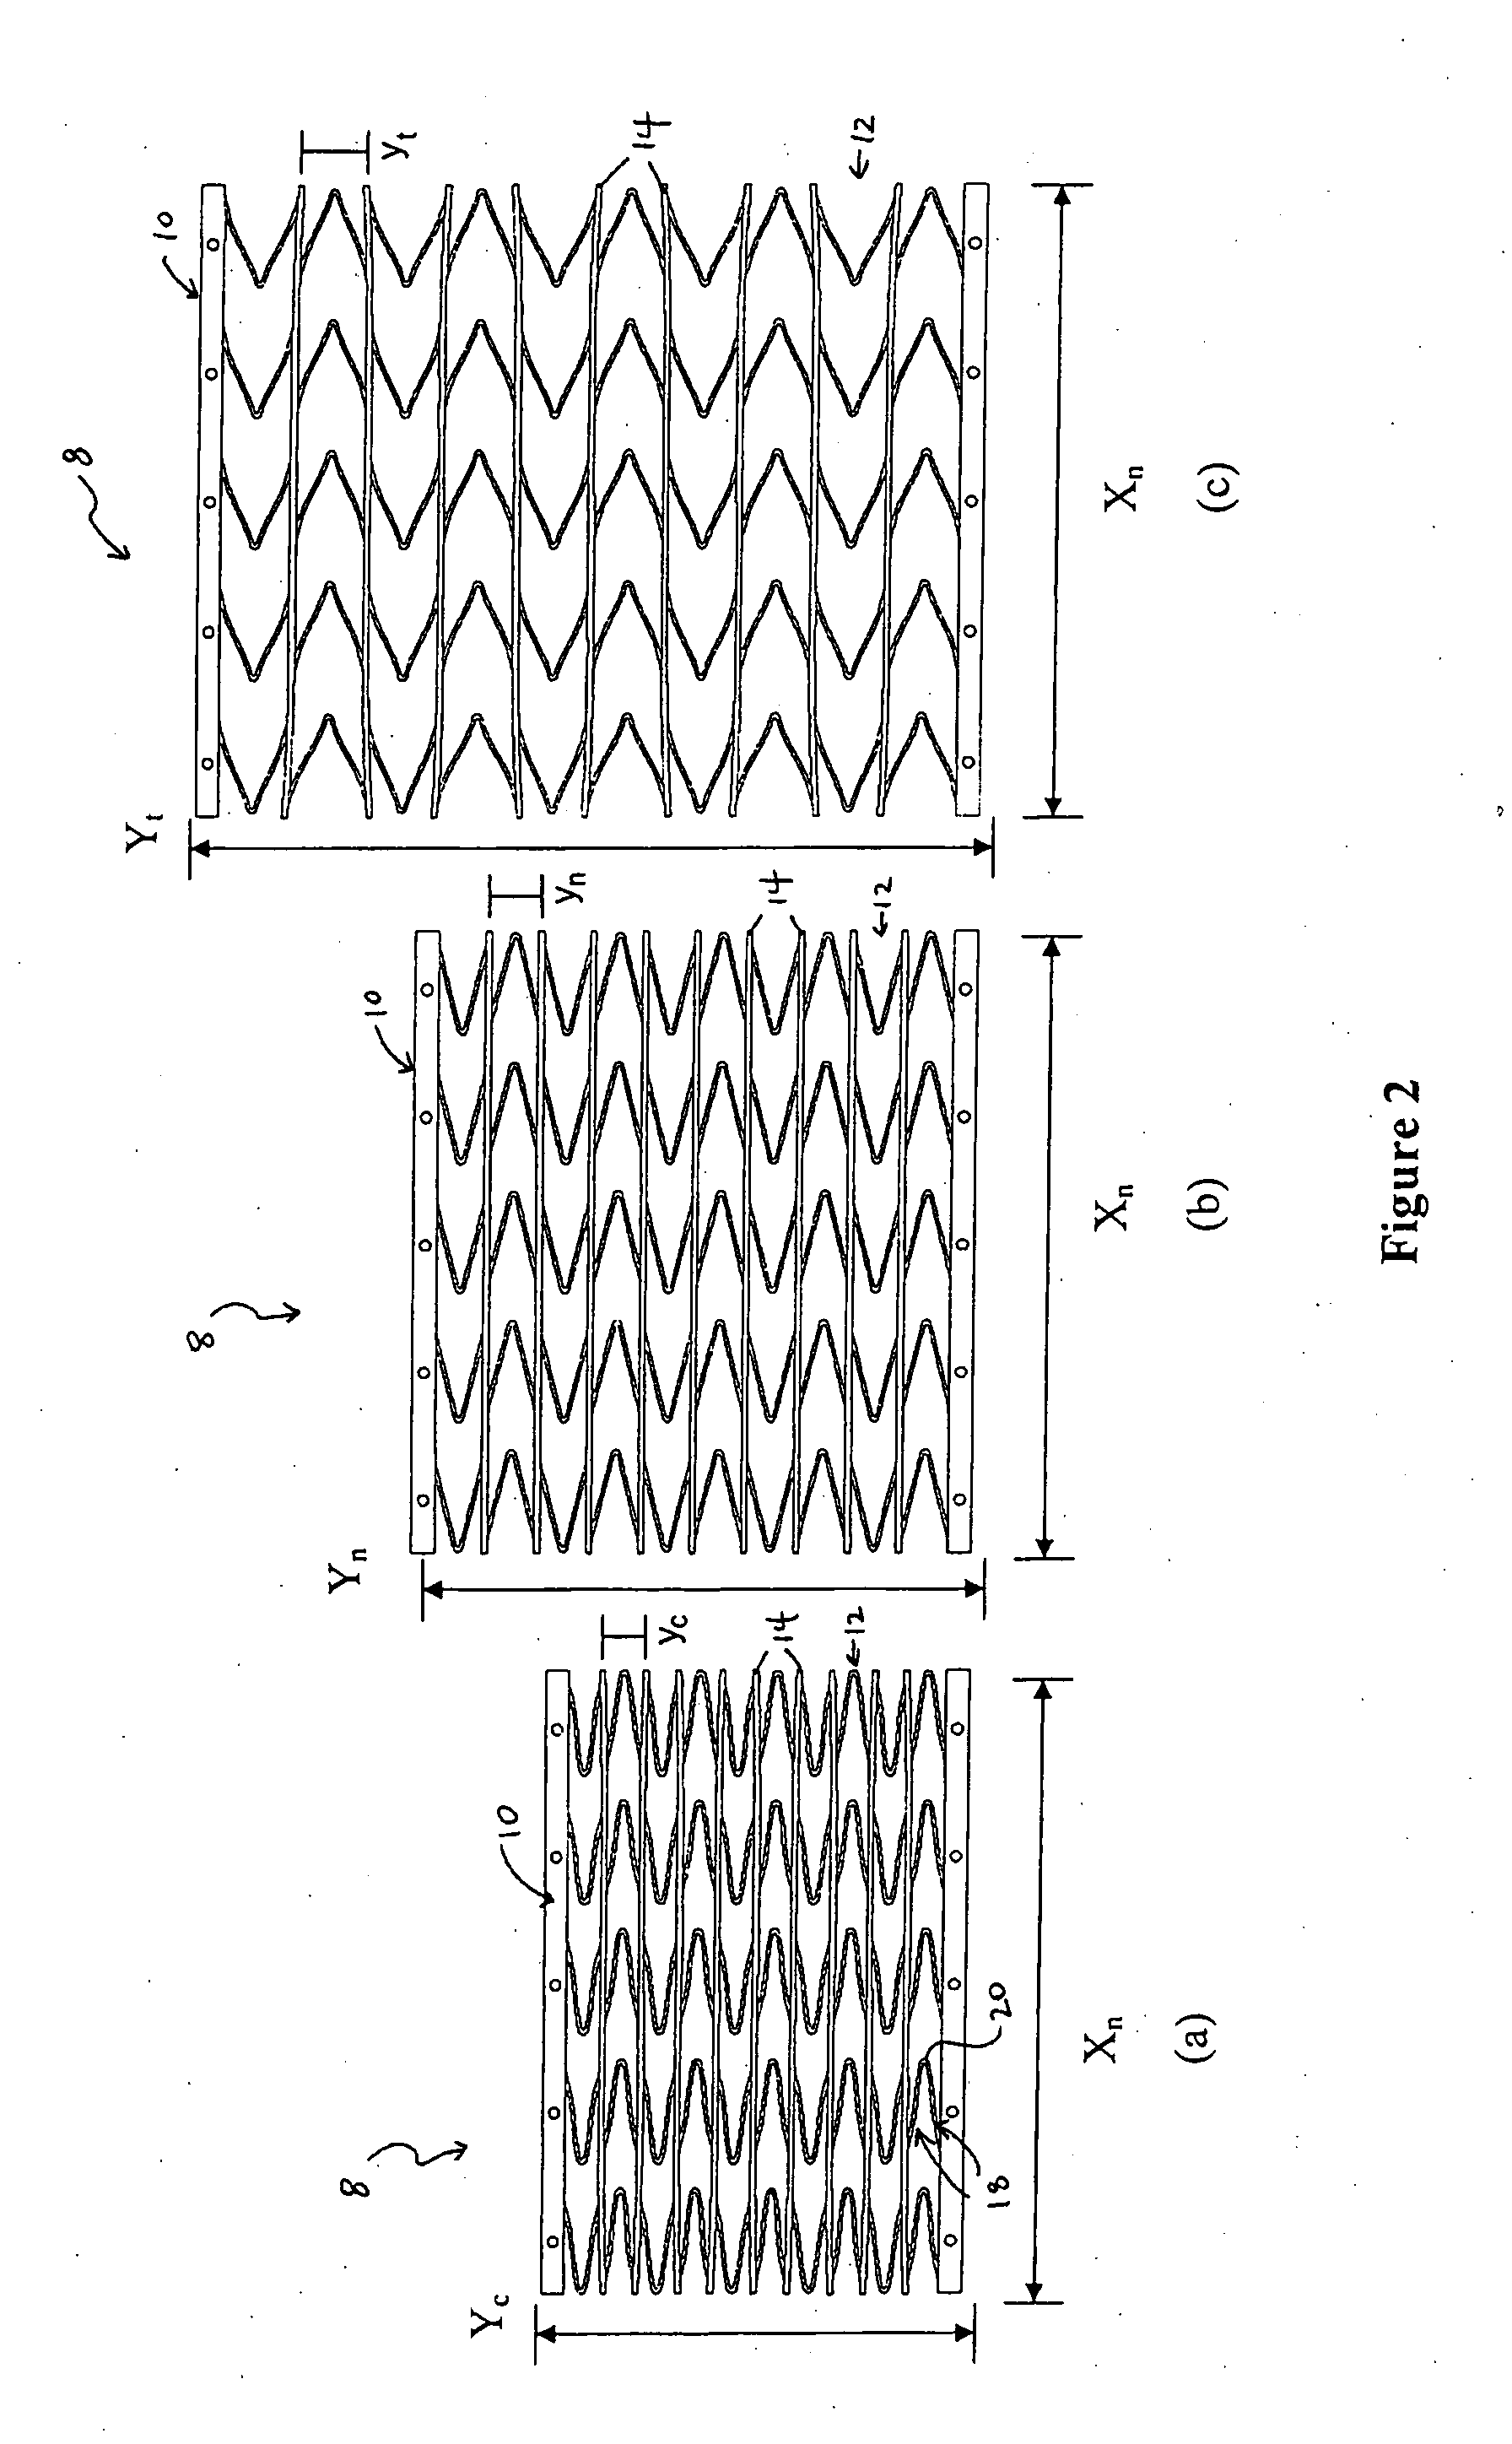 Cellular support structures used for controlled actuation of fluid contact surfaces